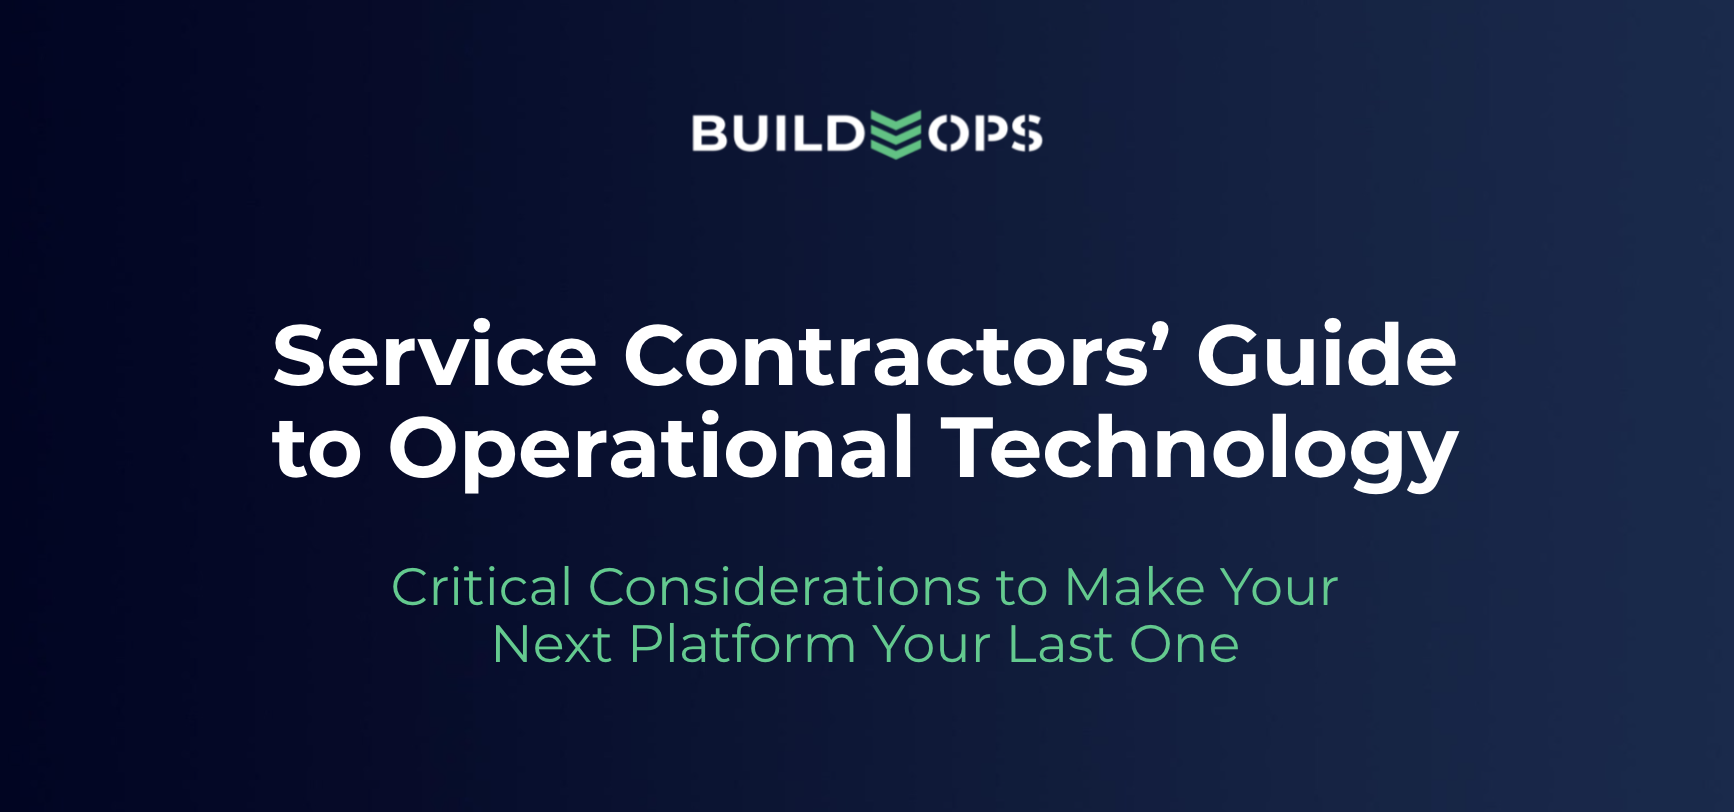 Service Contractors' Guide to Operational Technology